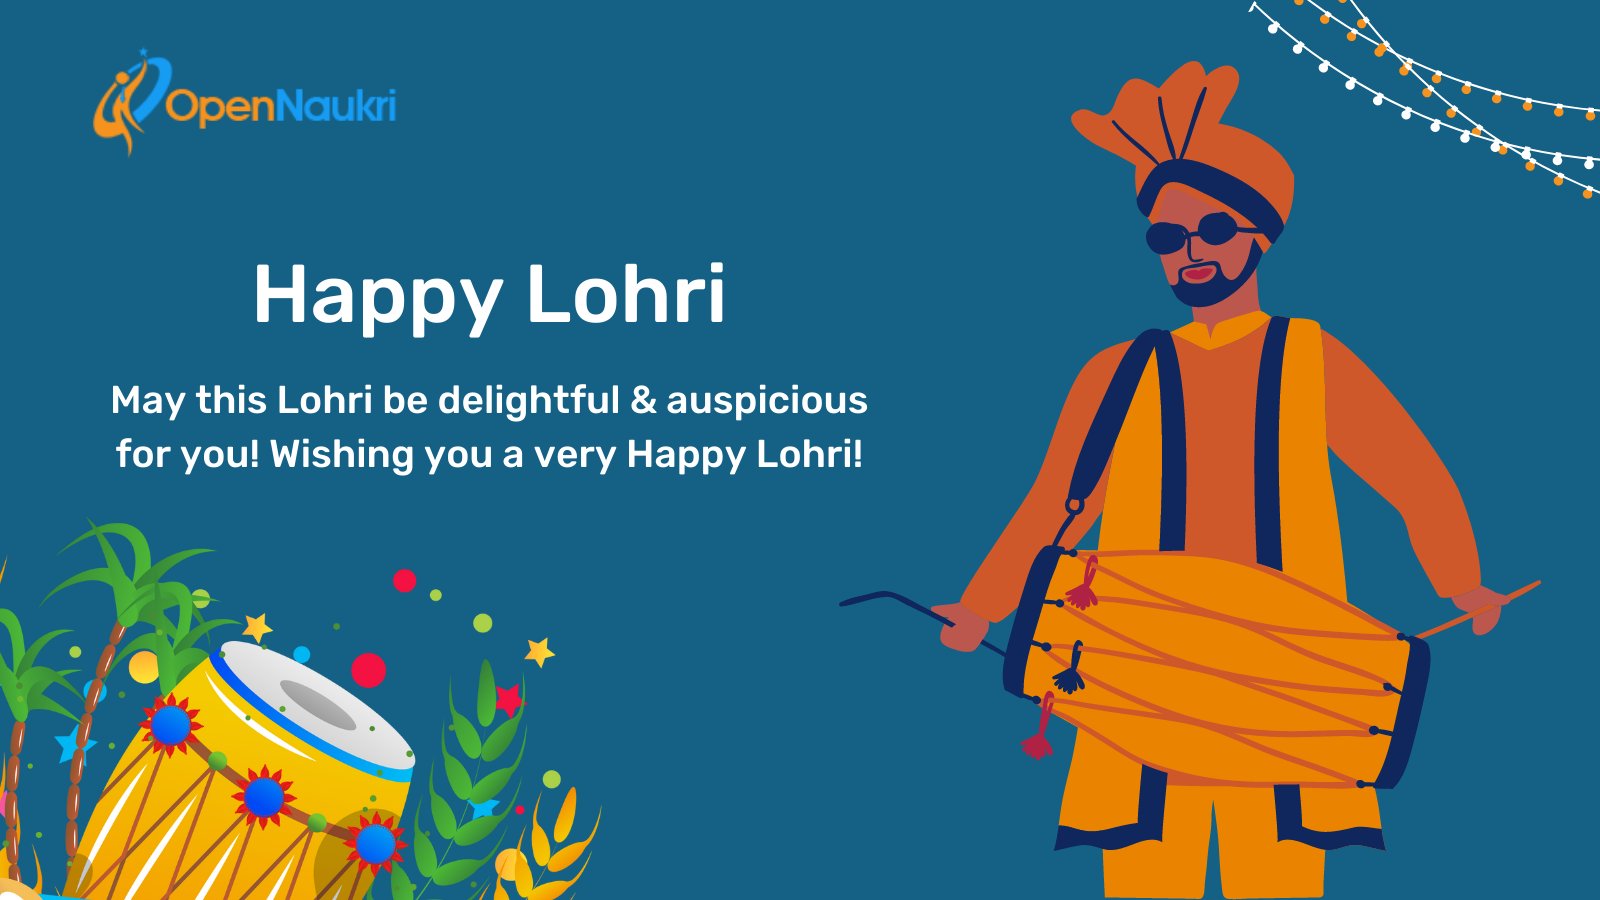 Open Naukri May This Lohri Bring Good Fortune Opportunities Your Way May Your Dreams Come True May All Your Aspirations Be Fulfilled We Wish You Days Of Pleasure